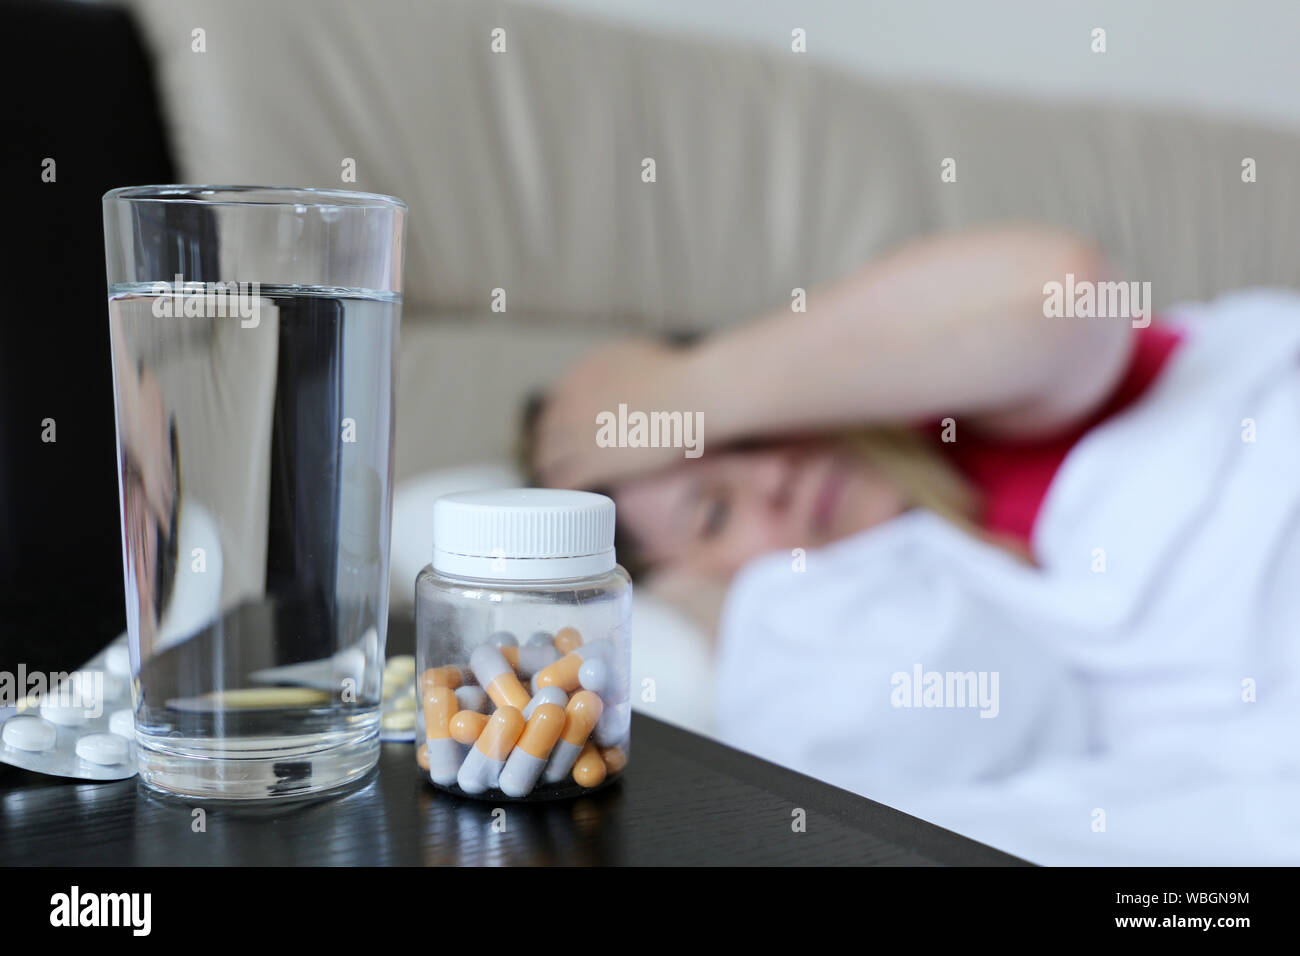 Sick woman lies in a bed holding hand to her forehead, cold and flu season. Pills and water glass in the foreground, concept of illness, fever Stock Photo